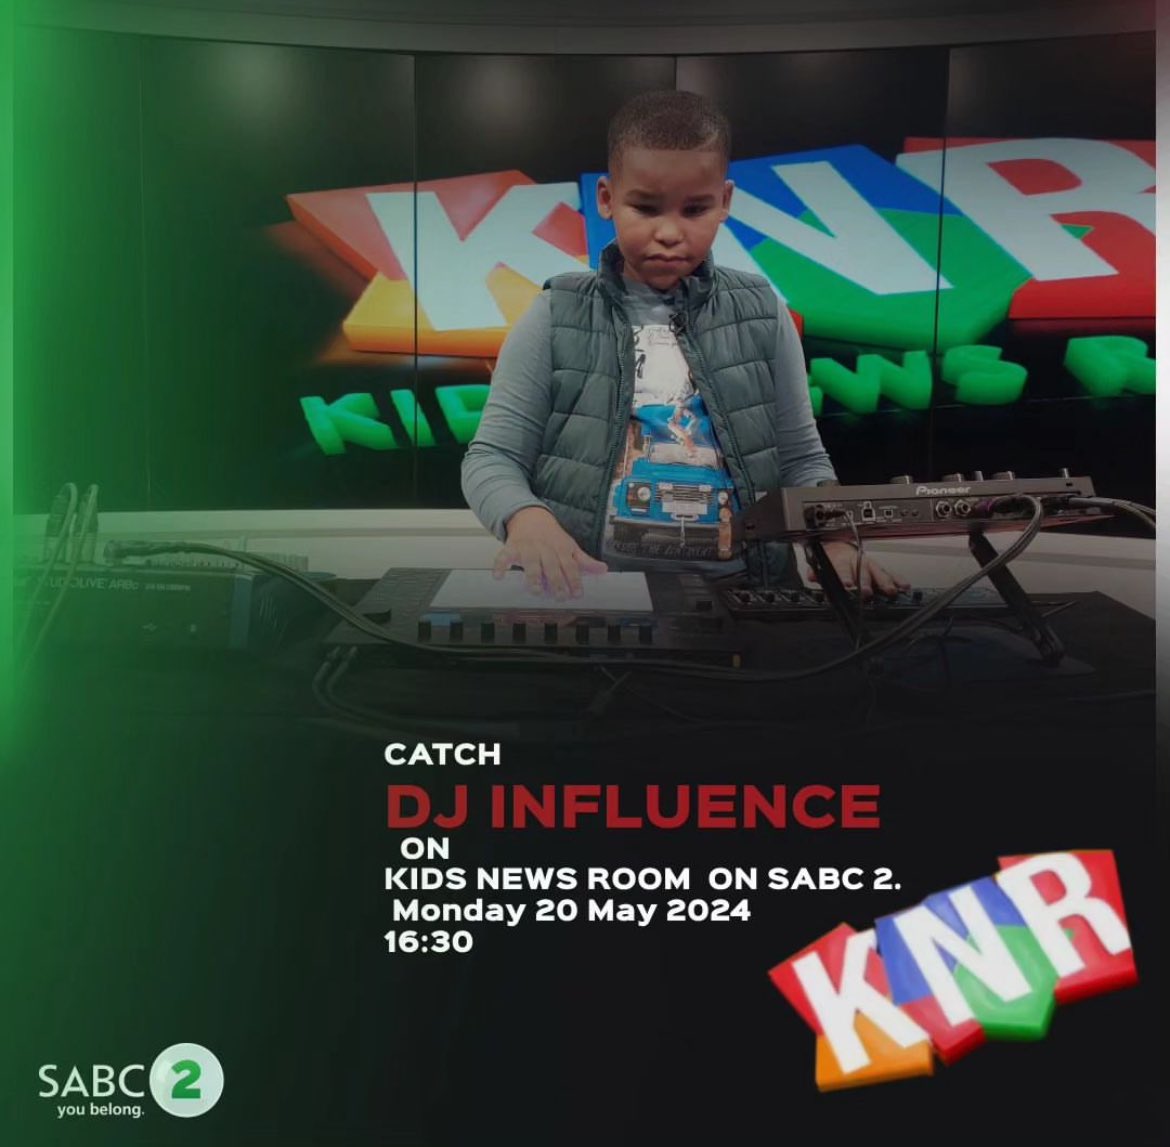 Thank you for having us @Kidsnewsro ! Please catch Influence on @SABC2 this afternoon at 16h30😊